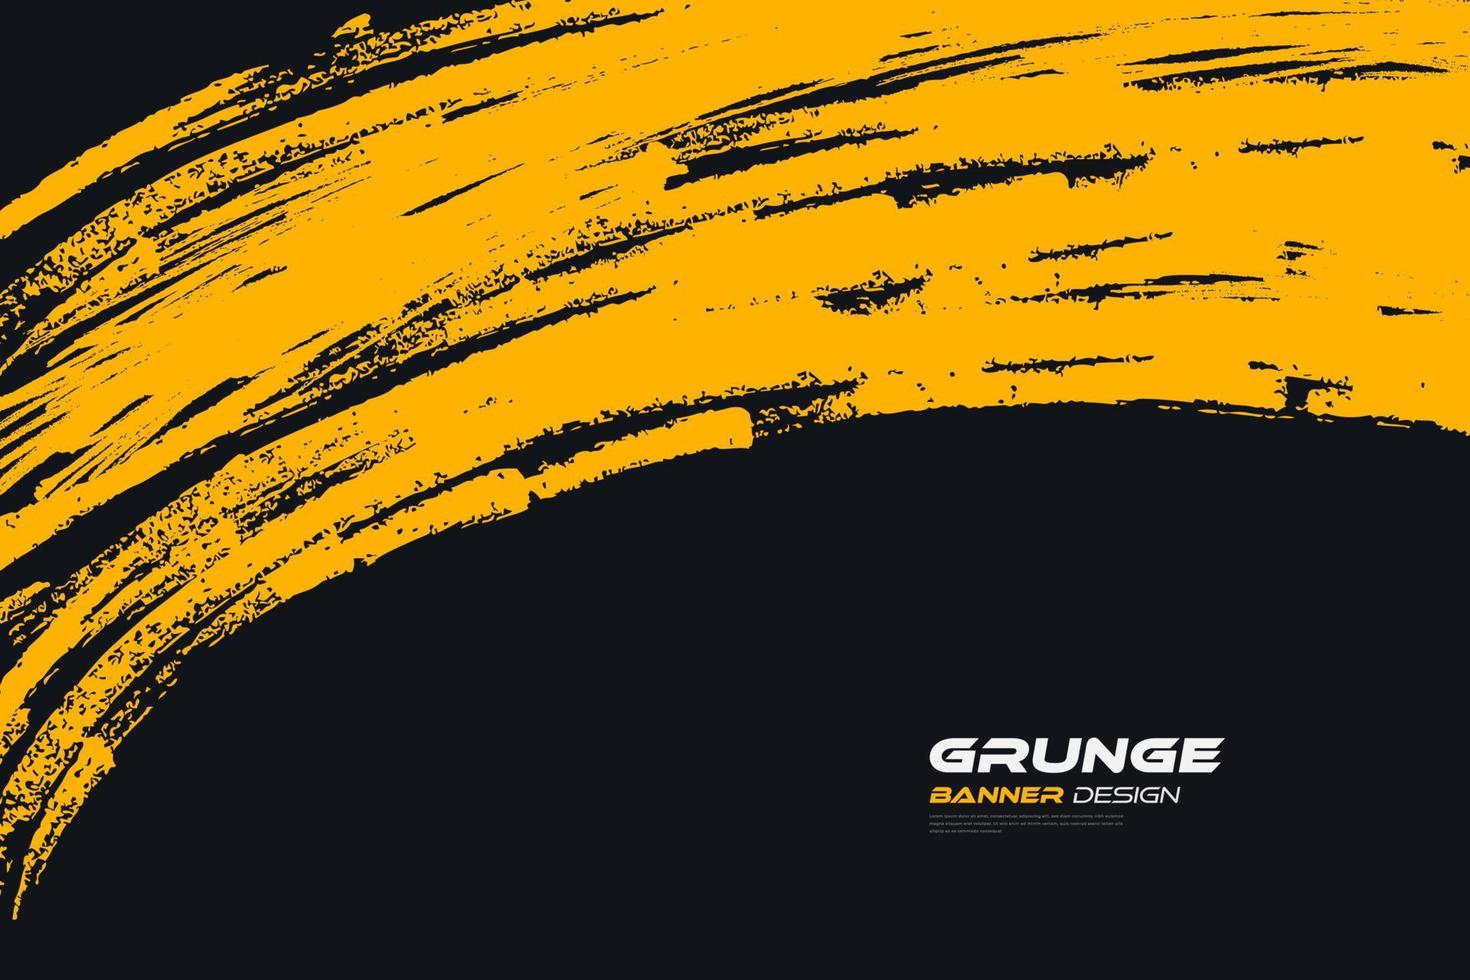 Abstract Black and Yellow Grunge Background. Brush Stroke Illustration for Banner, Poster, or Sports. Scratch and Texture Elements For Design vector